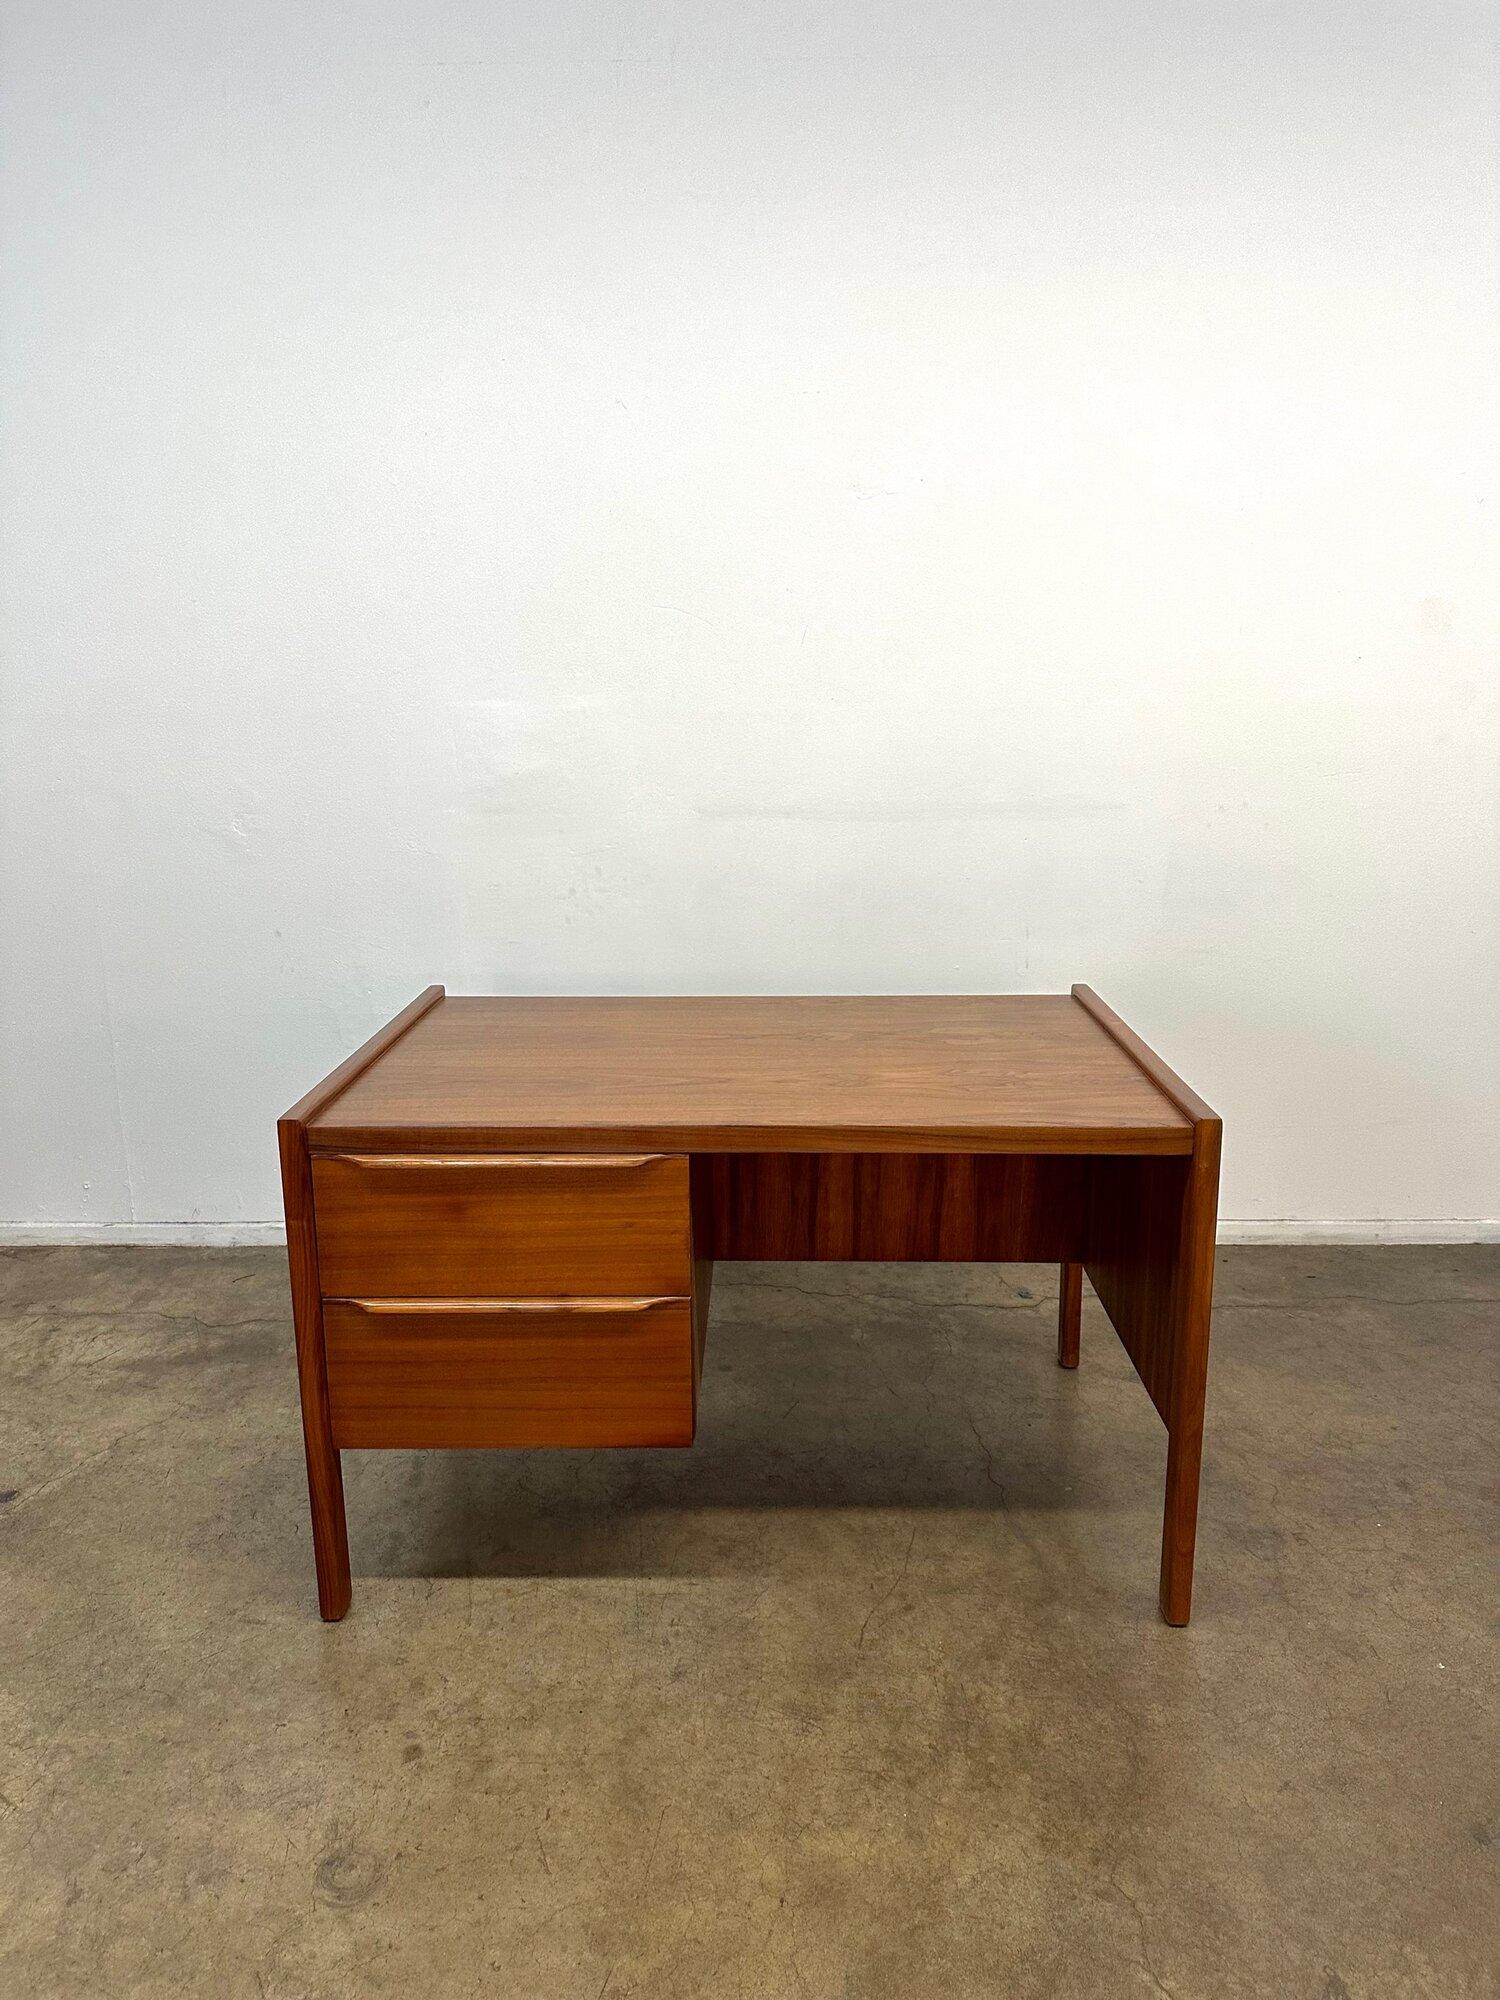 Dimensions: W48 D31.5 H29

Walnut executive desk in fully restored condition. Item is structurally sound with no major areas of wear. The desk is finished on all sides.